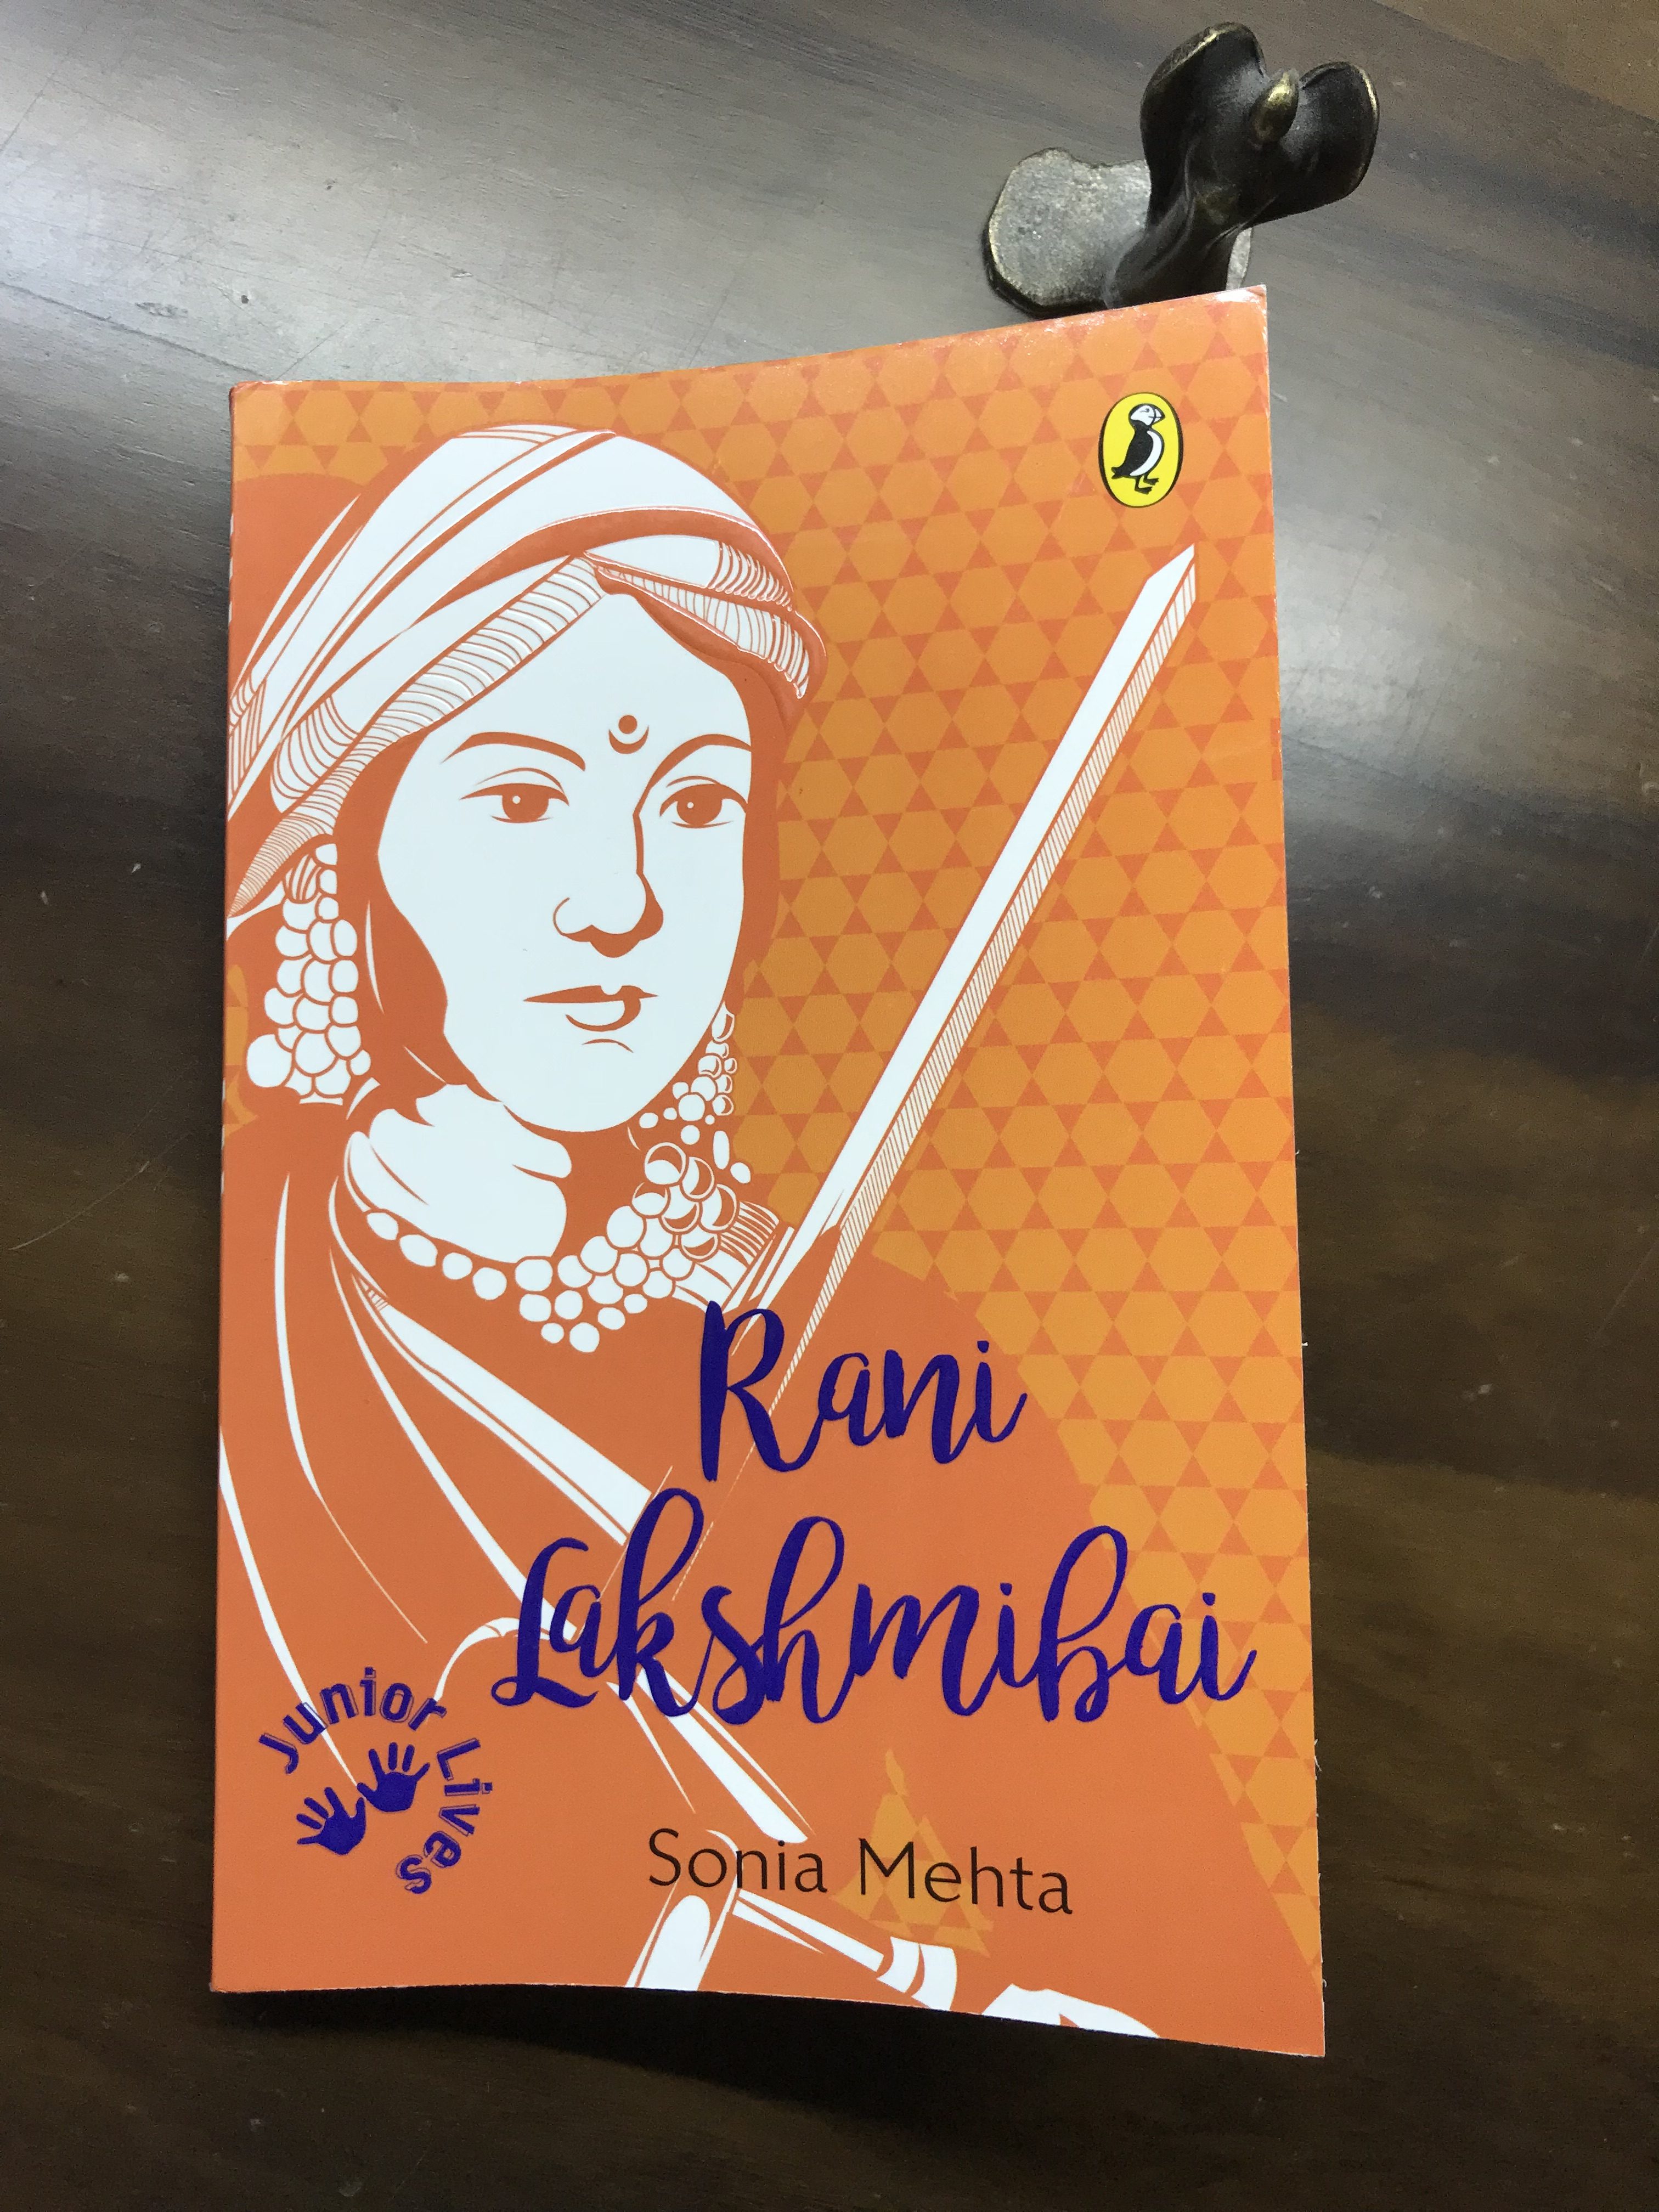 You are currently viewing Puffin books presents a Rani Lakshmibai biography by Sonia Mehta for young readers